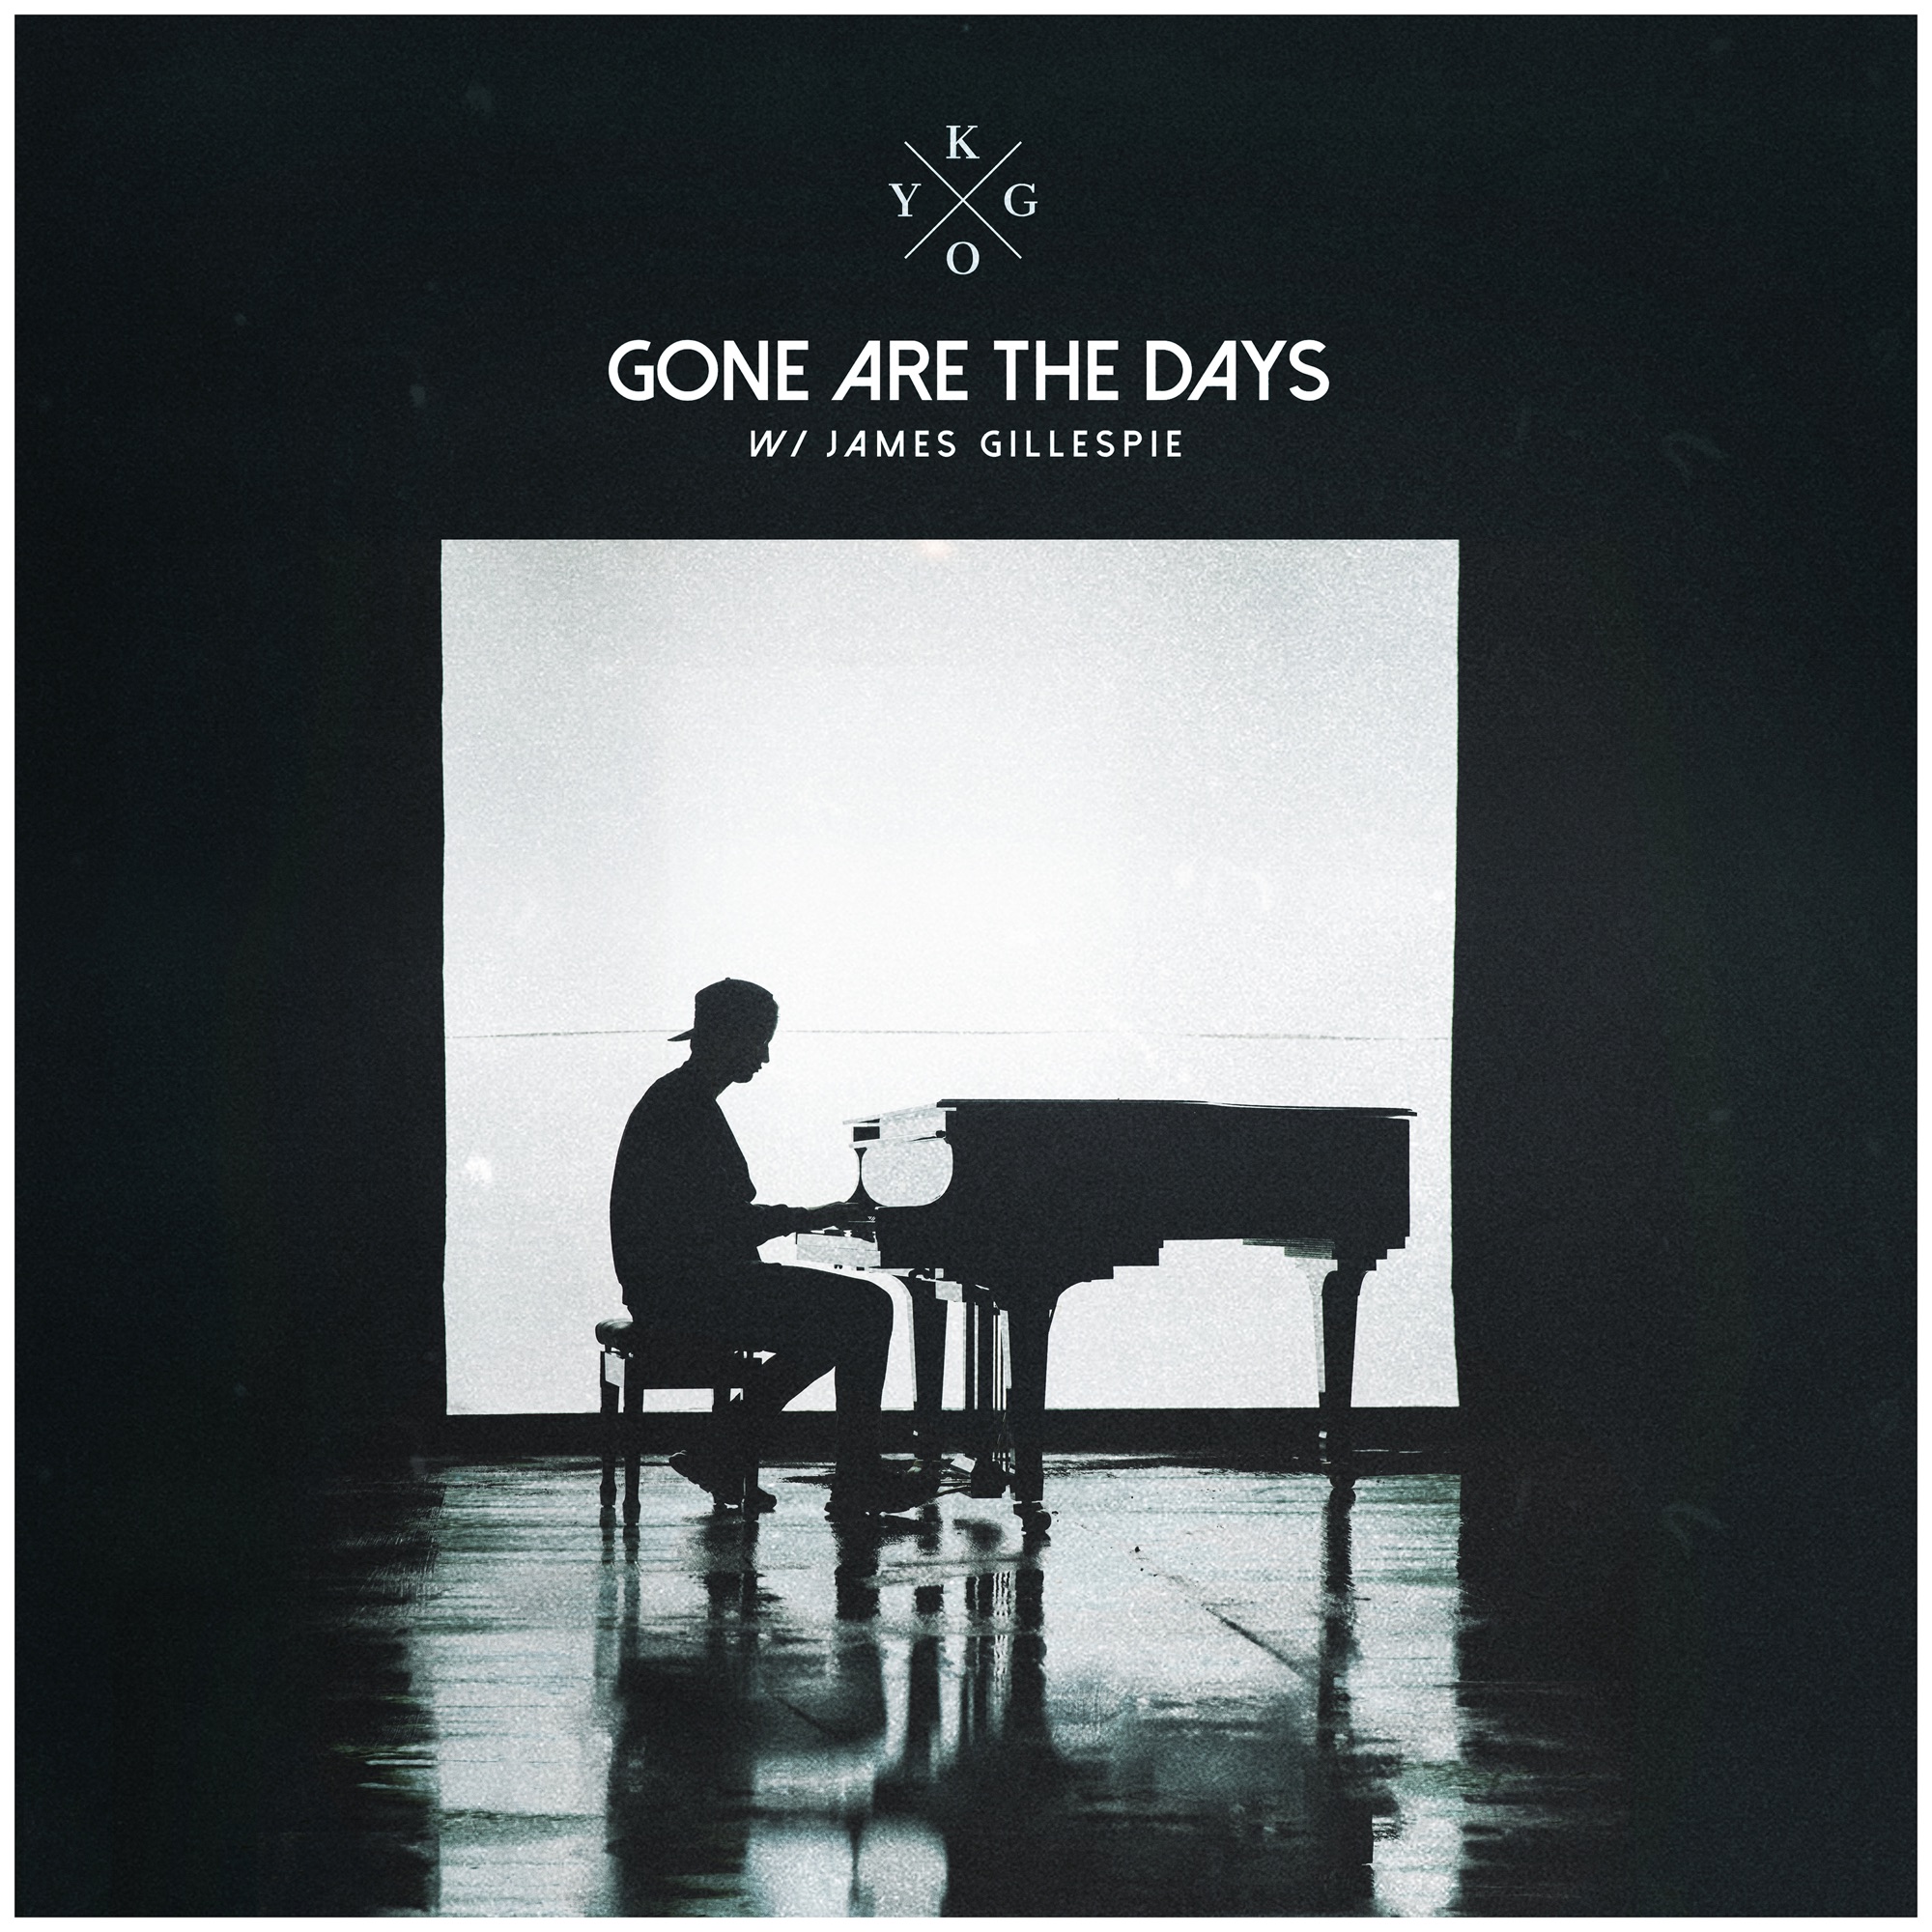 Kygo - Gone Are The Days (feat. James Gillespie) - Single